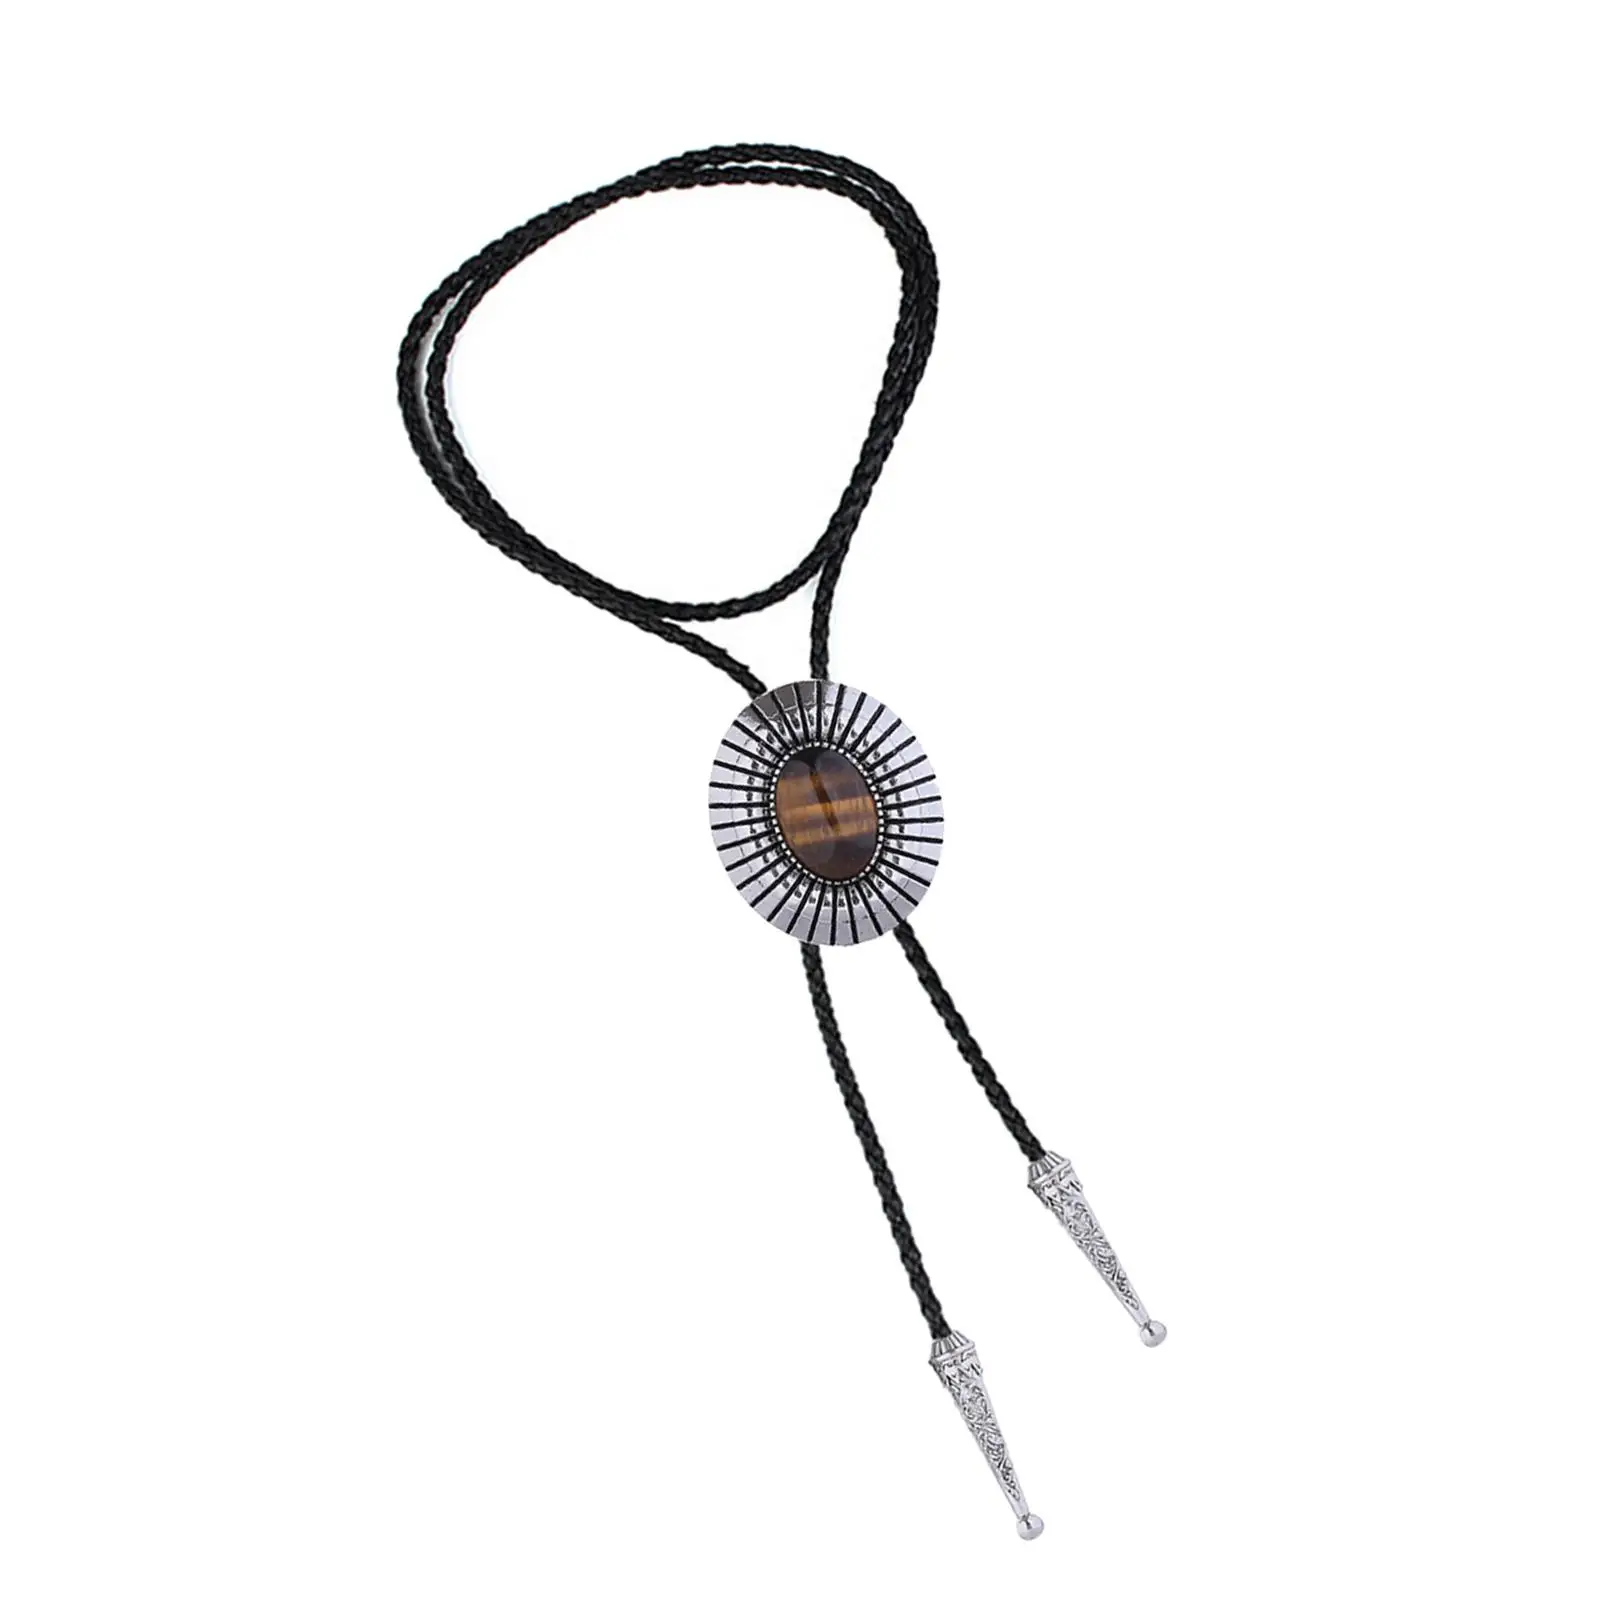 Bolo Tie Necktie Western Cowboy Adjustable Costume American Gift Vintage Oval PU Leather Necklace for Birthday Men Women